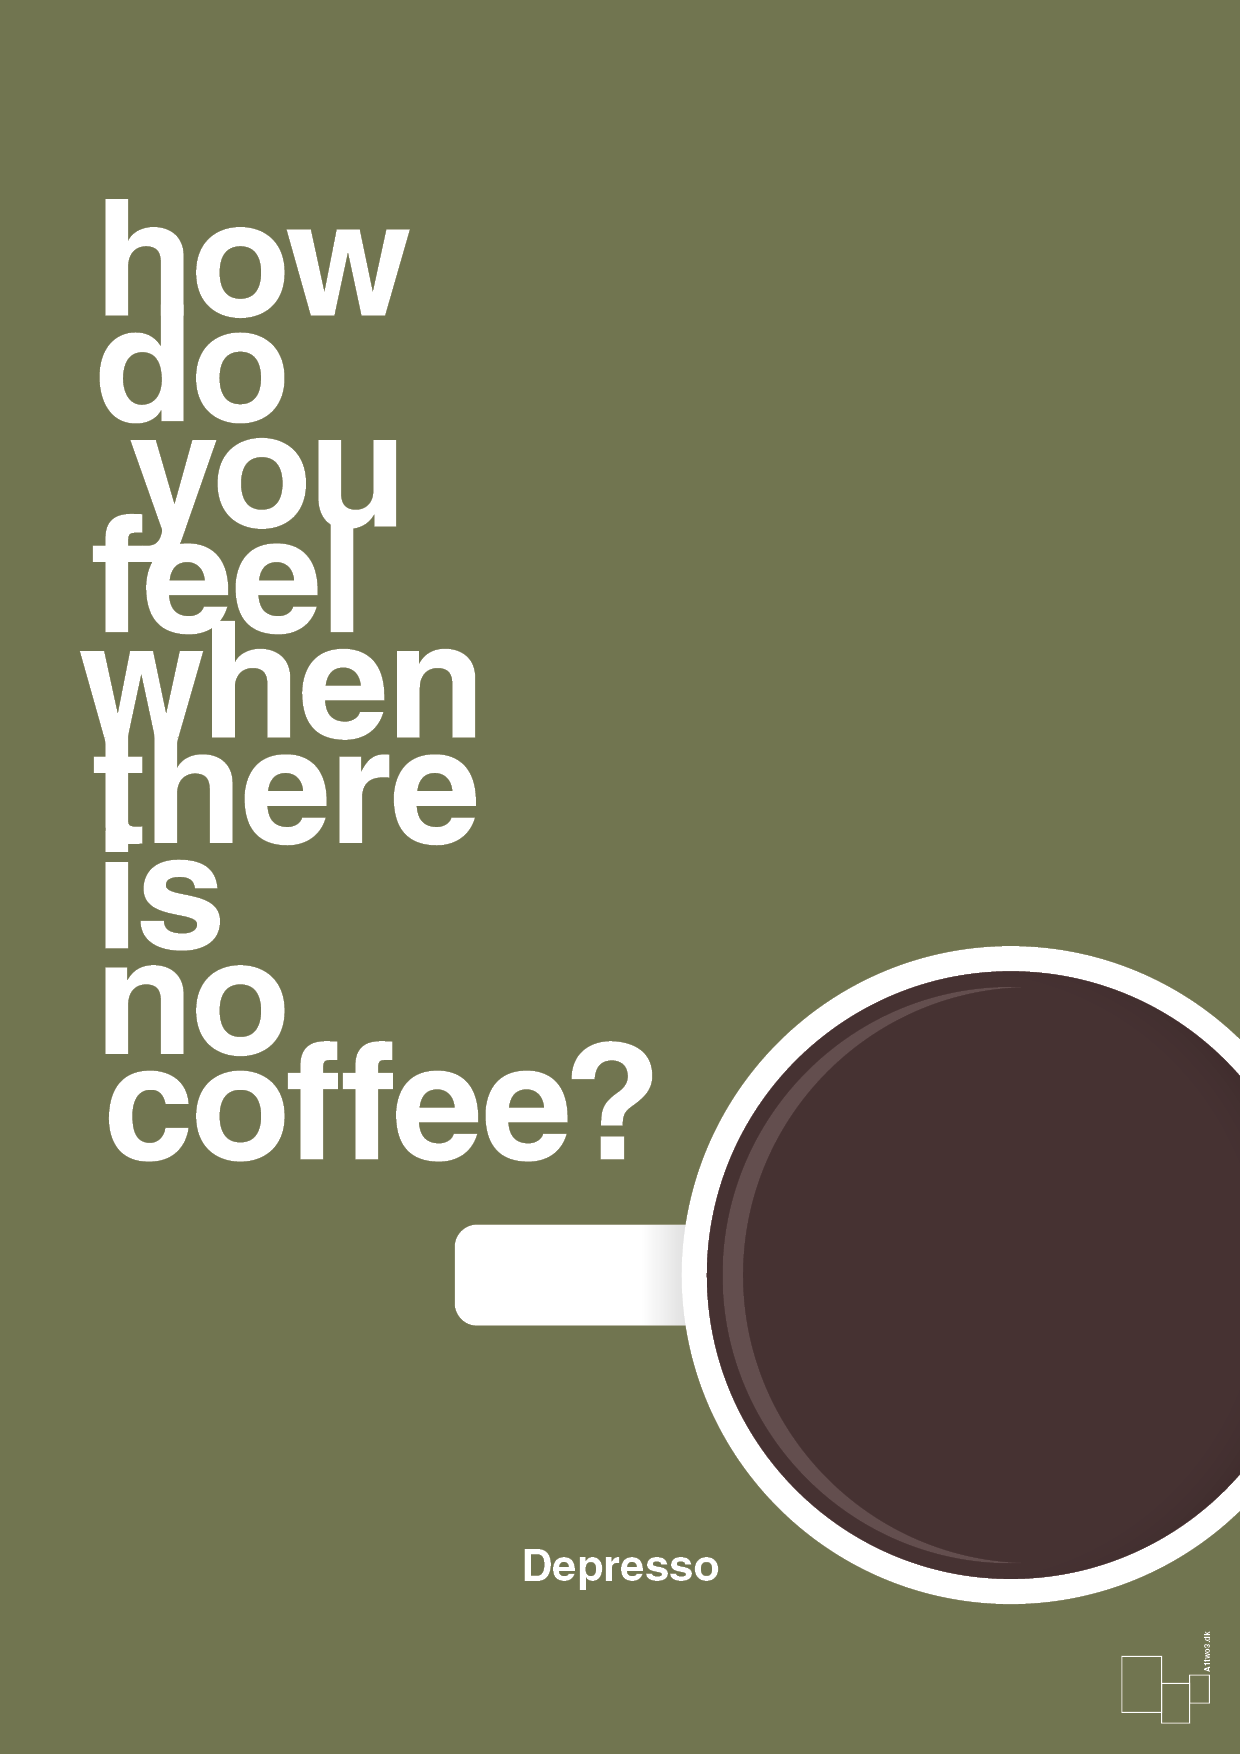 how do you feel when there is no coffee? depresso - Plakat med Mad & Drikke i Secret Meadow